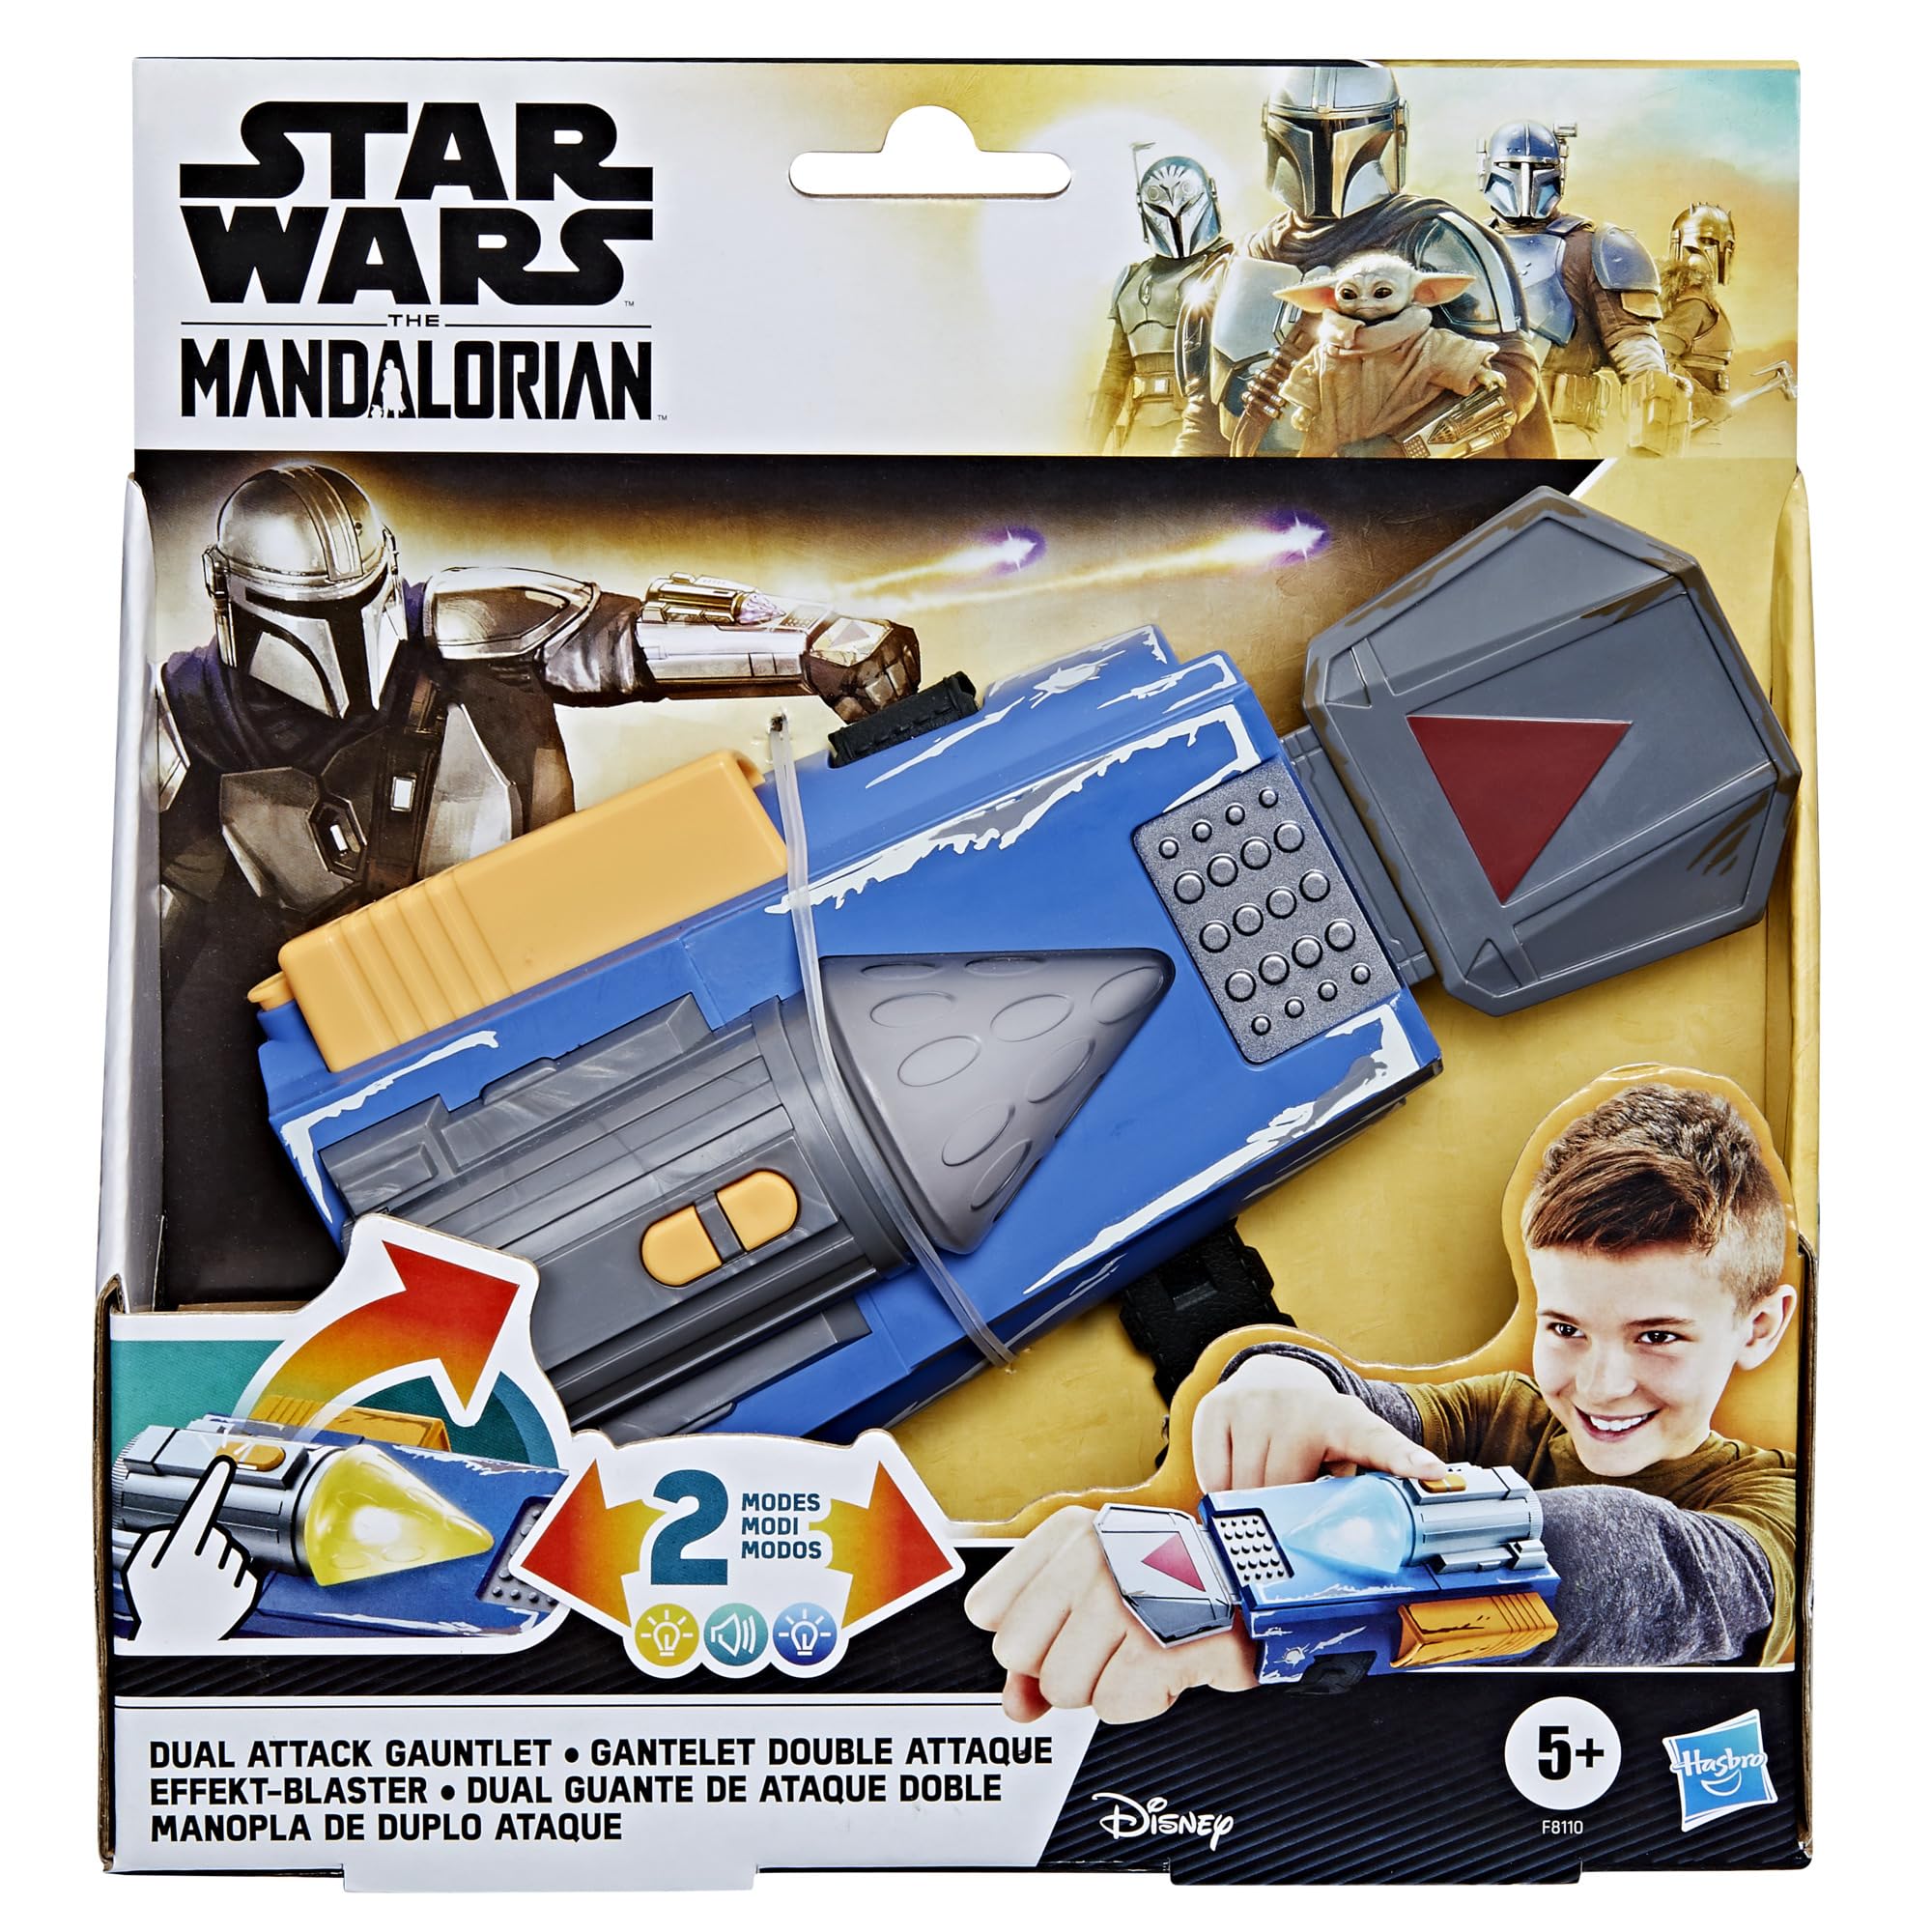 STAR WARS The Mandalorian Dual Attack Gauntlet, Interactive Electronic Role Play with Lights & Sounds, Toys for 5 Year Old Boys and Girls